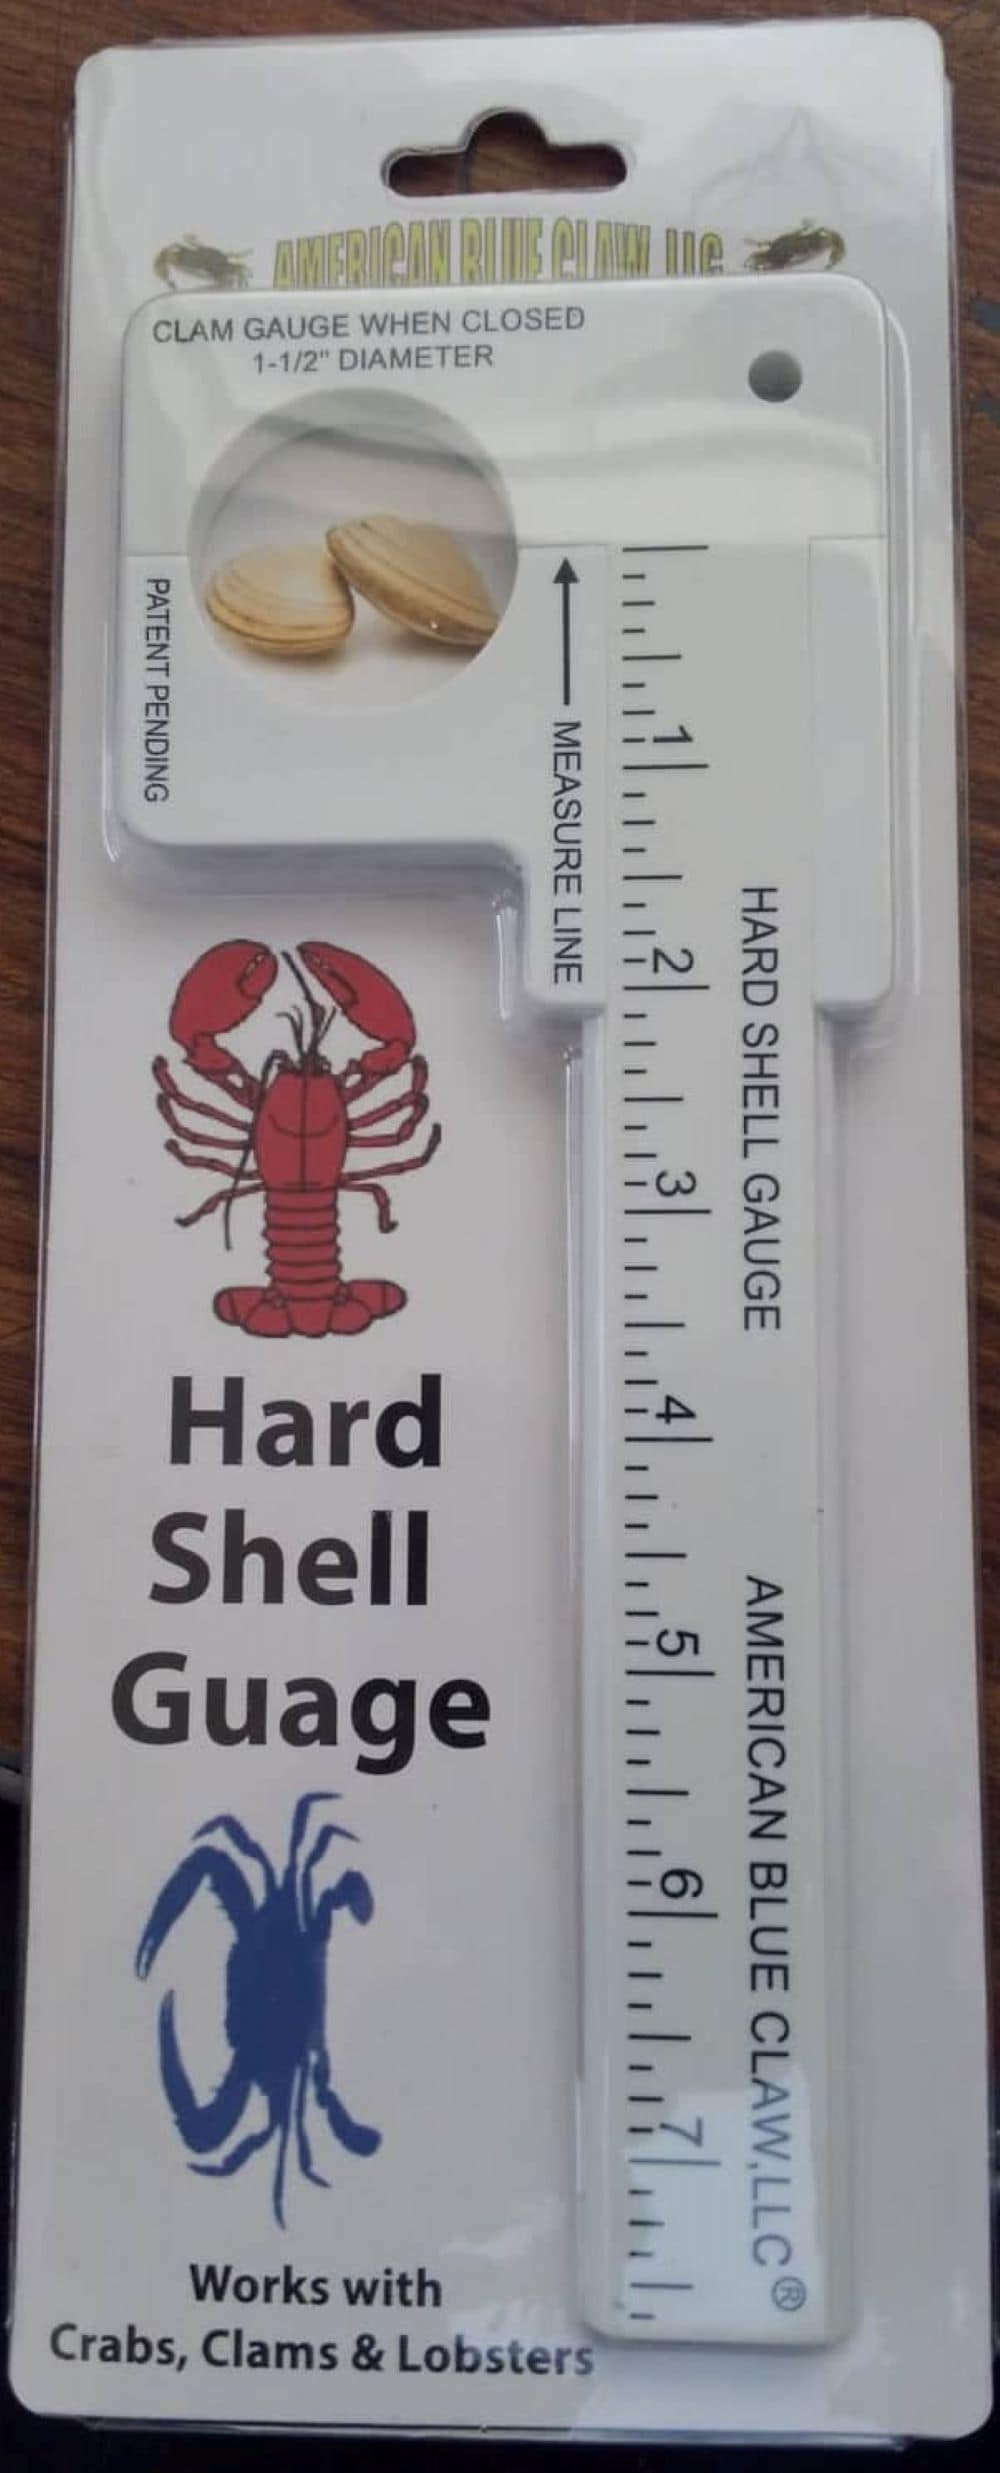 American Blue Claw Black Crabbing Equipment: Crab Tong with Gauge